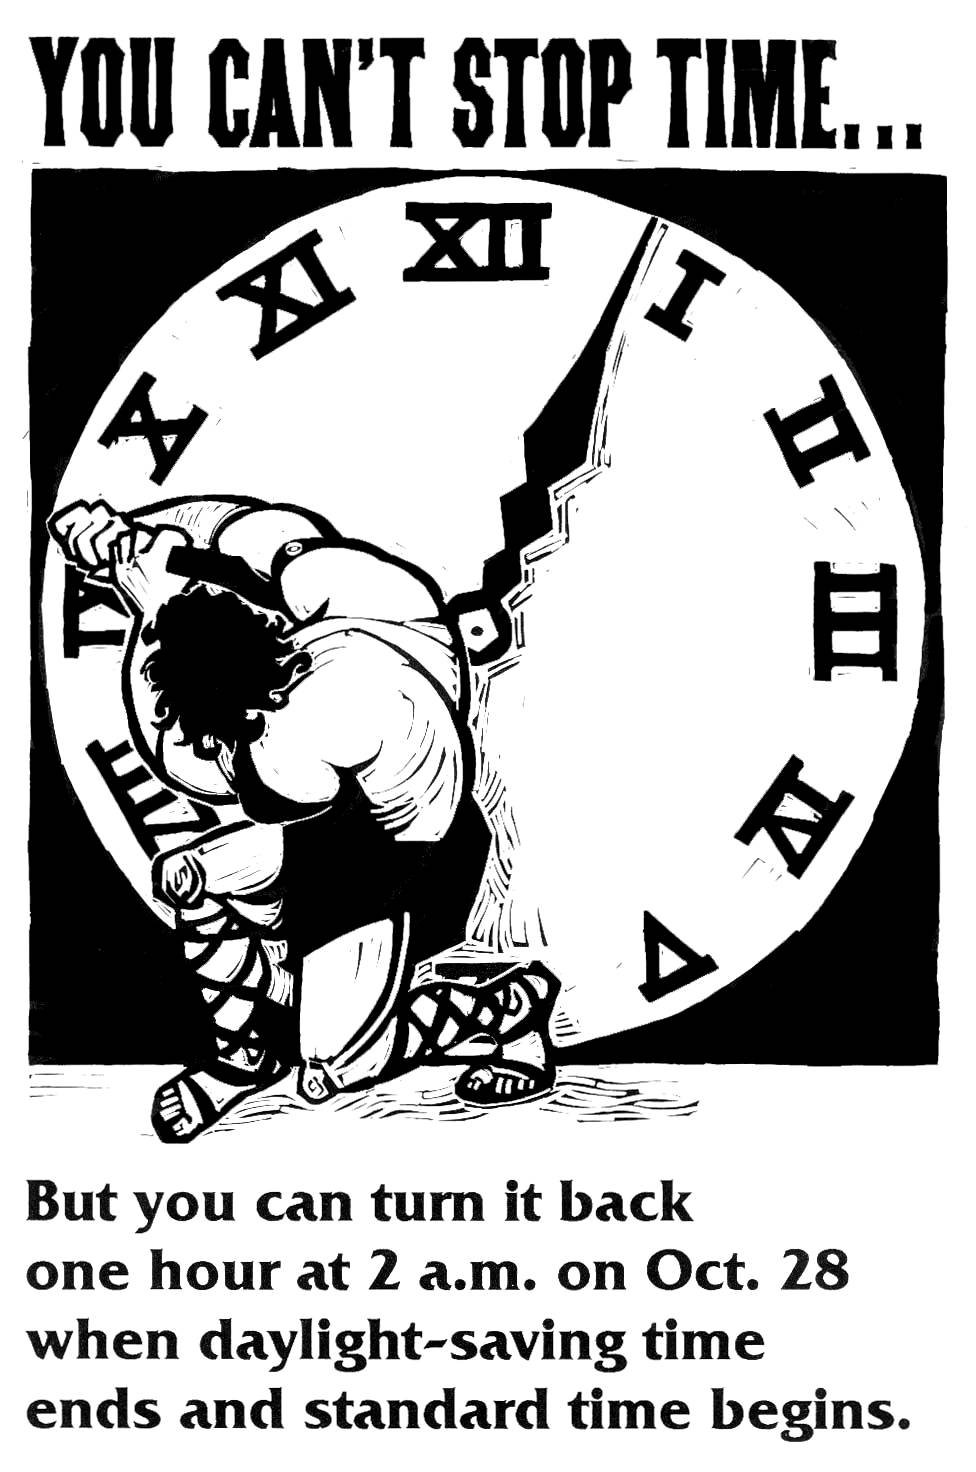 The Daylight Saving Time (DST) « To Speak Alone